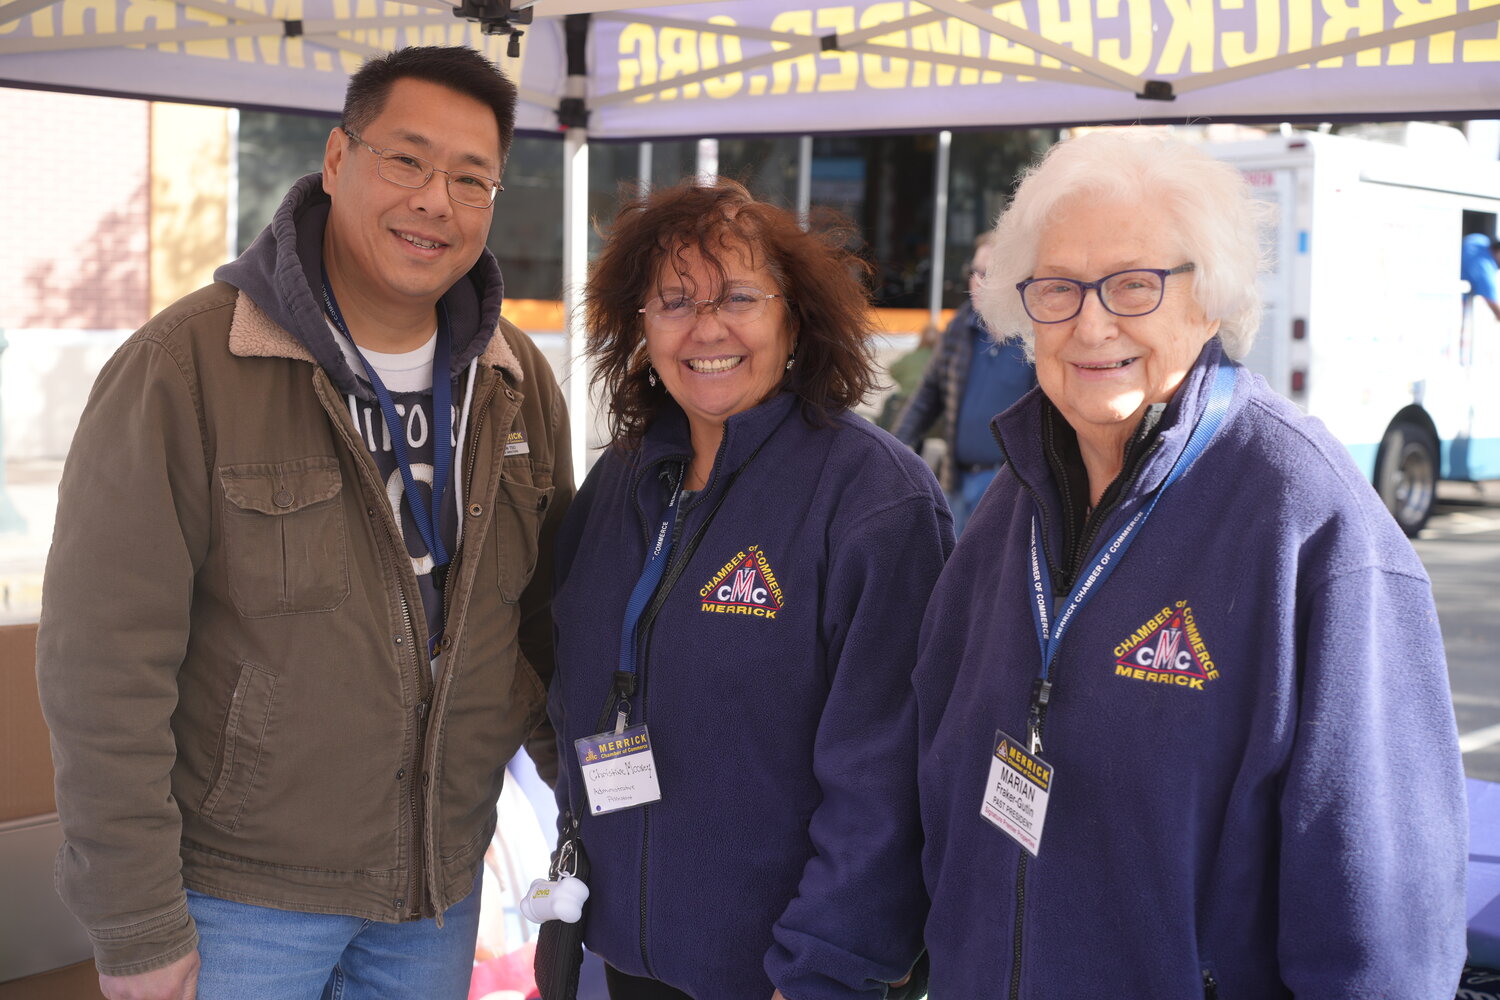 Nelson Tso, Christine Mooney and Marian Fraker-Gutin of the Merrick Chamber met with fairgoers throughout the day.